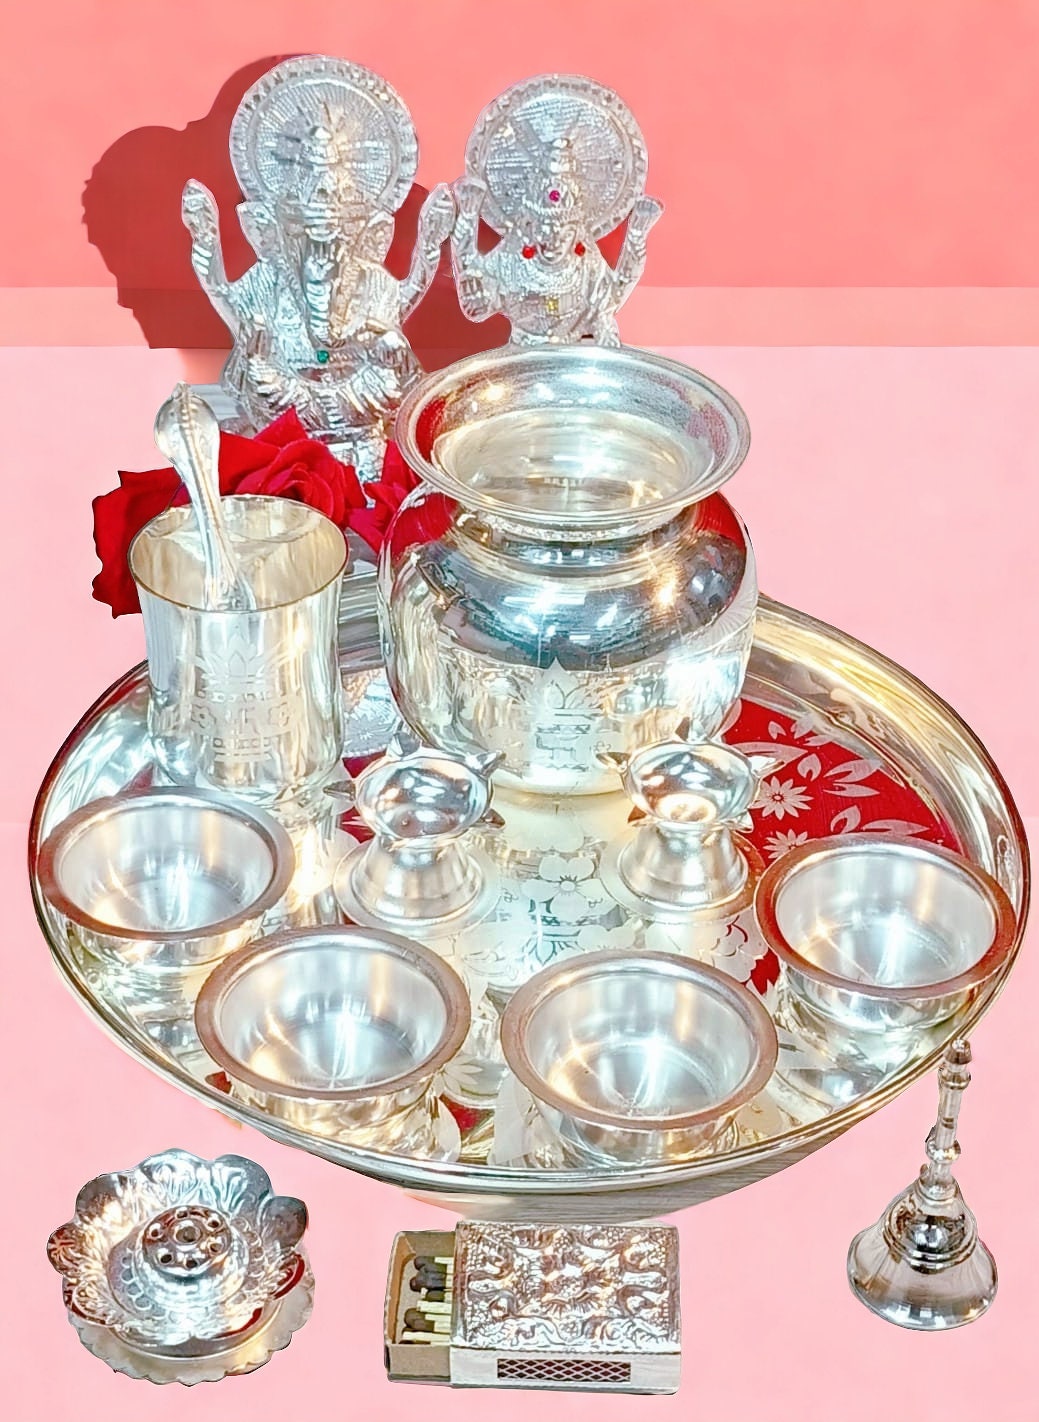 NOBILITY Brass Pooja thali Set 8 Inch Puja Thali Decorative for Diwali,  Home, Temple, Office, Wedding Gift Items